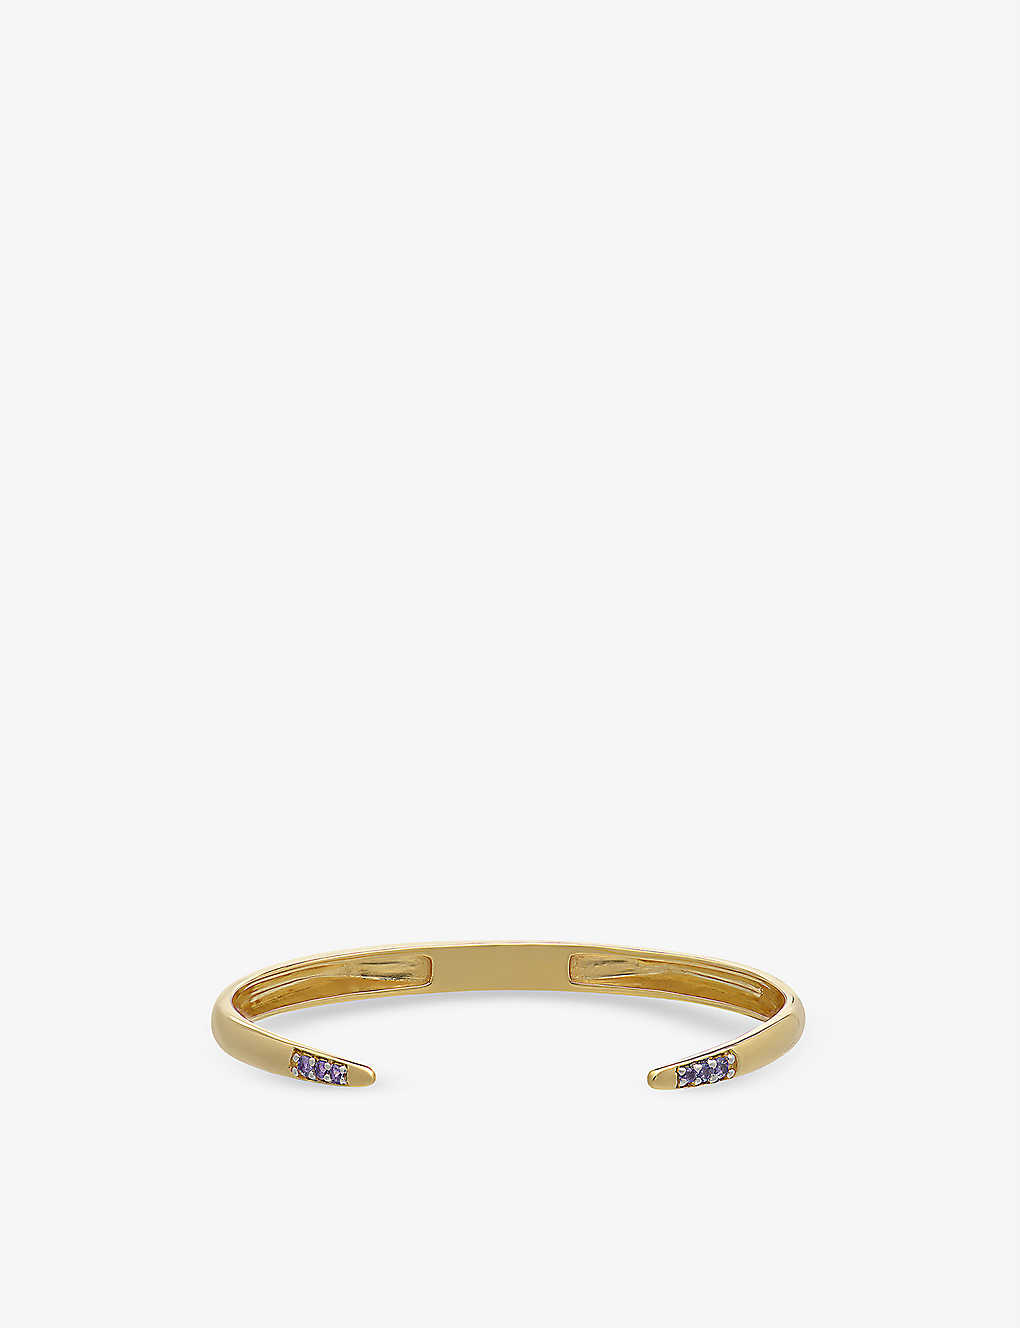 Rachel Jackson Birthstone February 22ct Gold-plated Sterling-silver And Amethyst Bangle